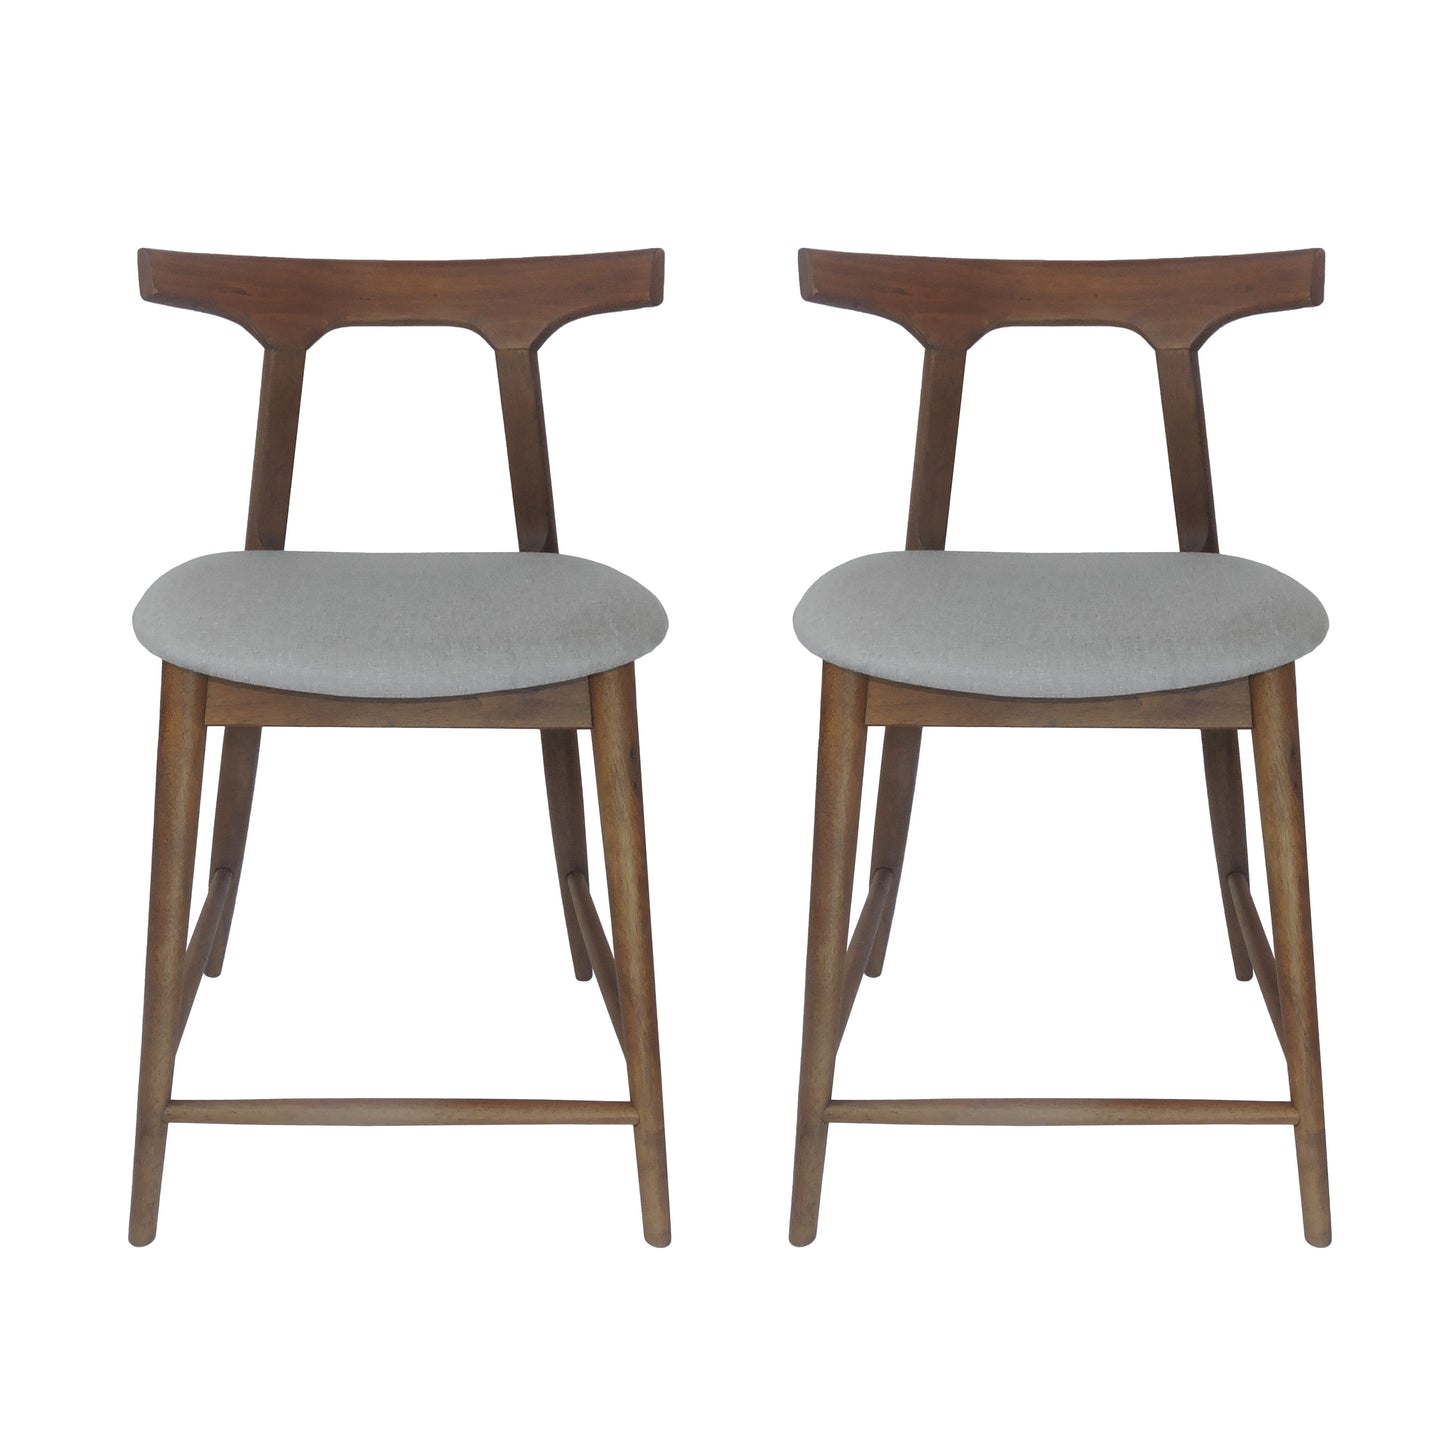 Annett Mid Century Modern Fabric Upholstered Wood 24.5 Inch Counter Stools (Set of 2)